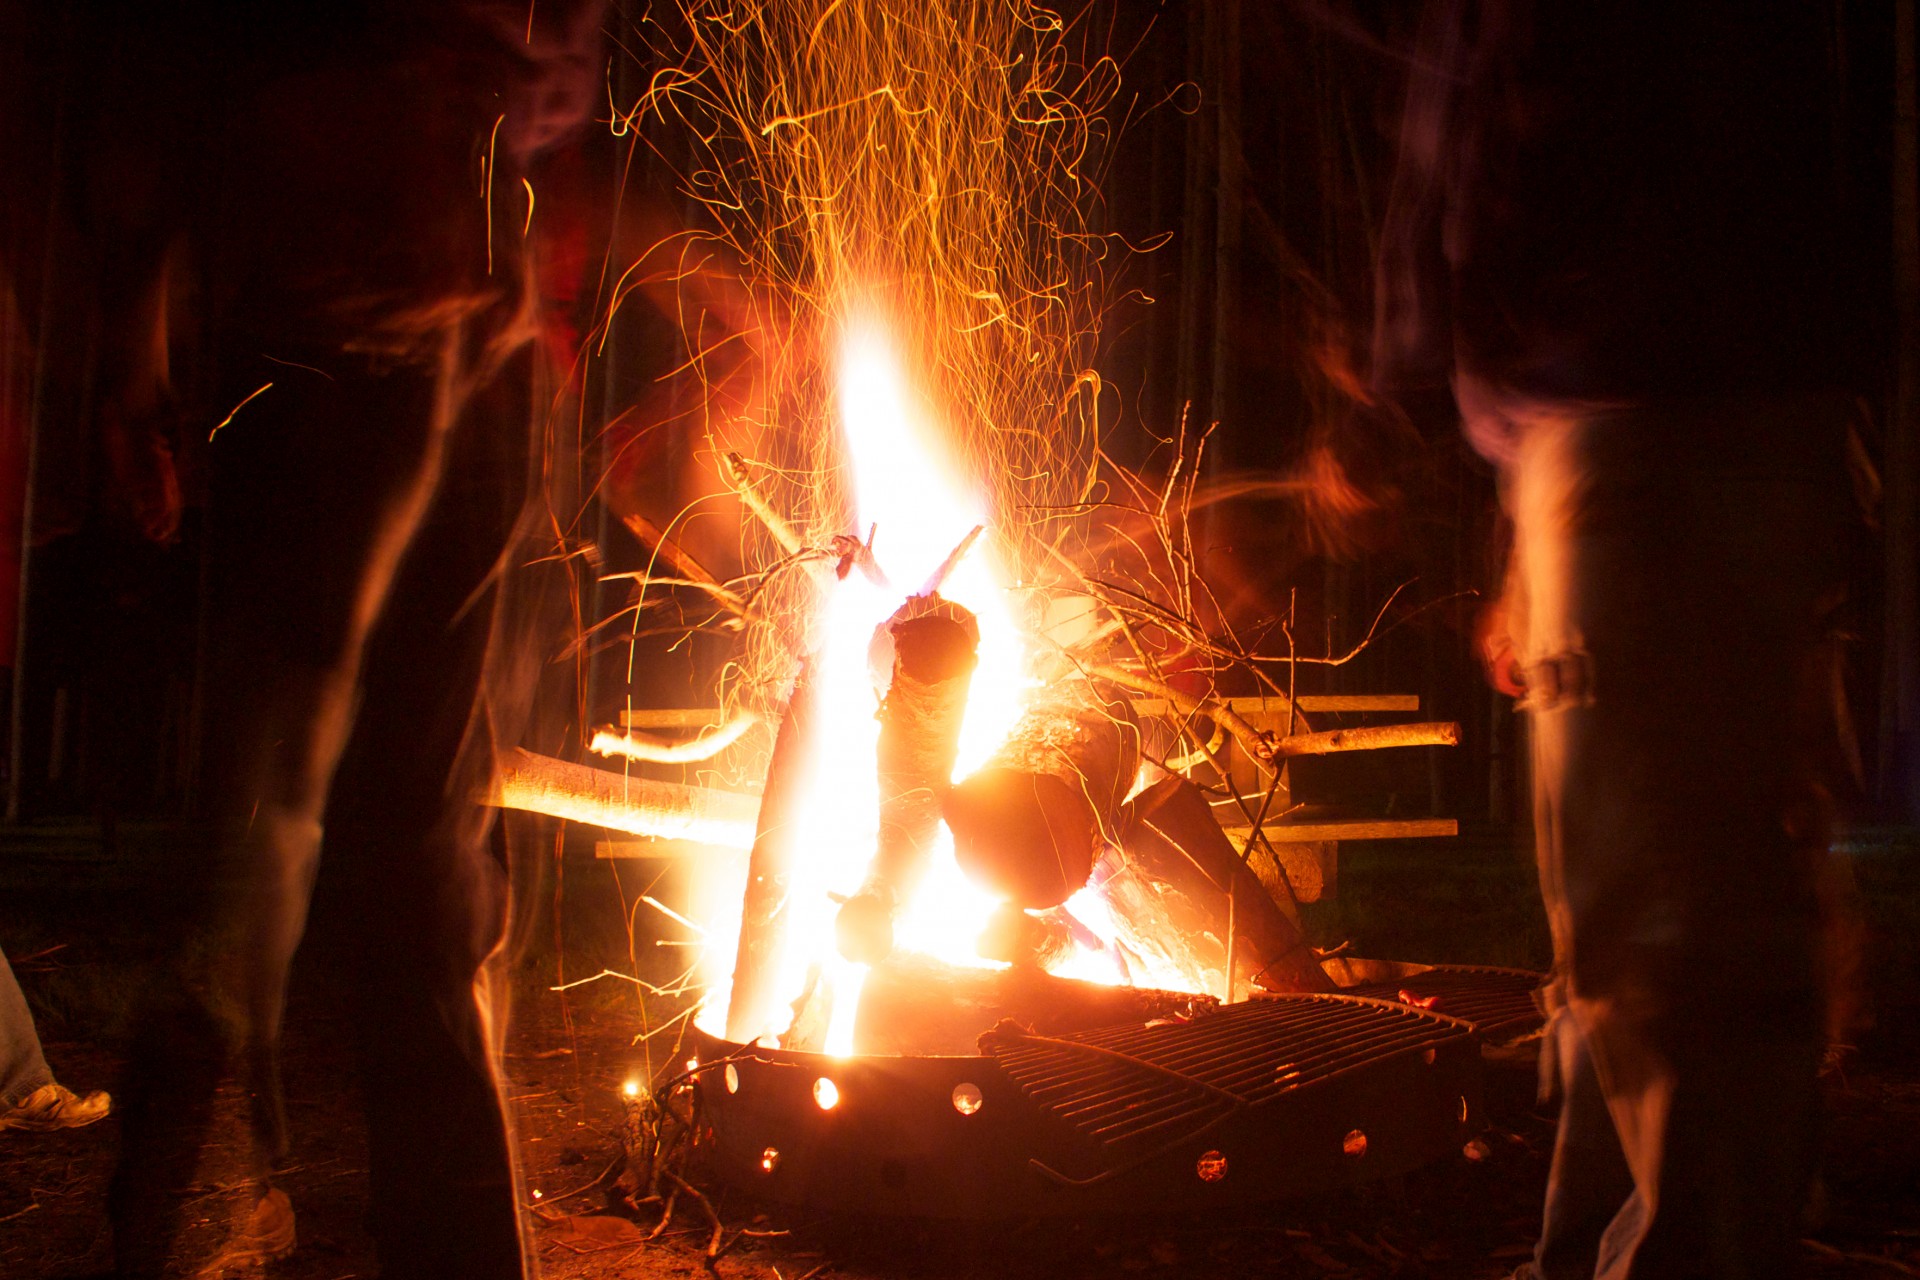 People mill around a raging campfire late at night.